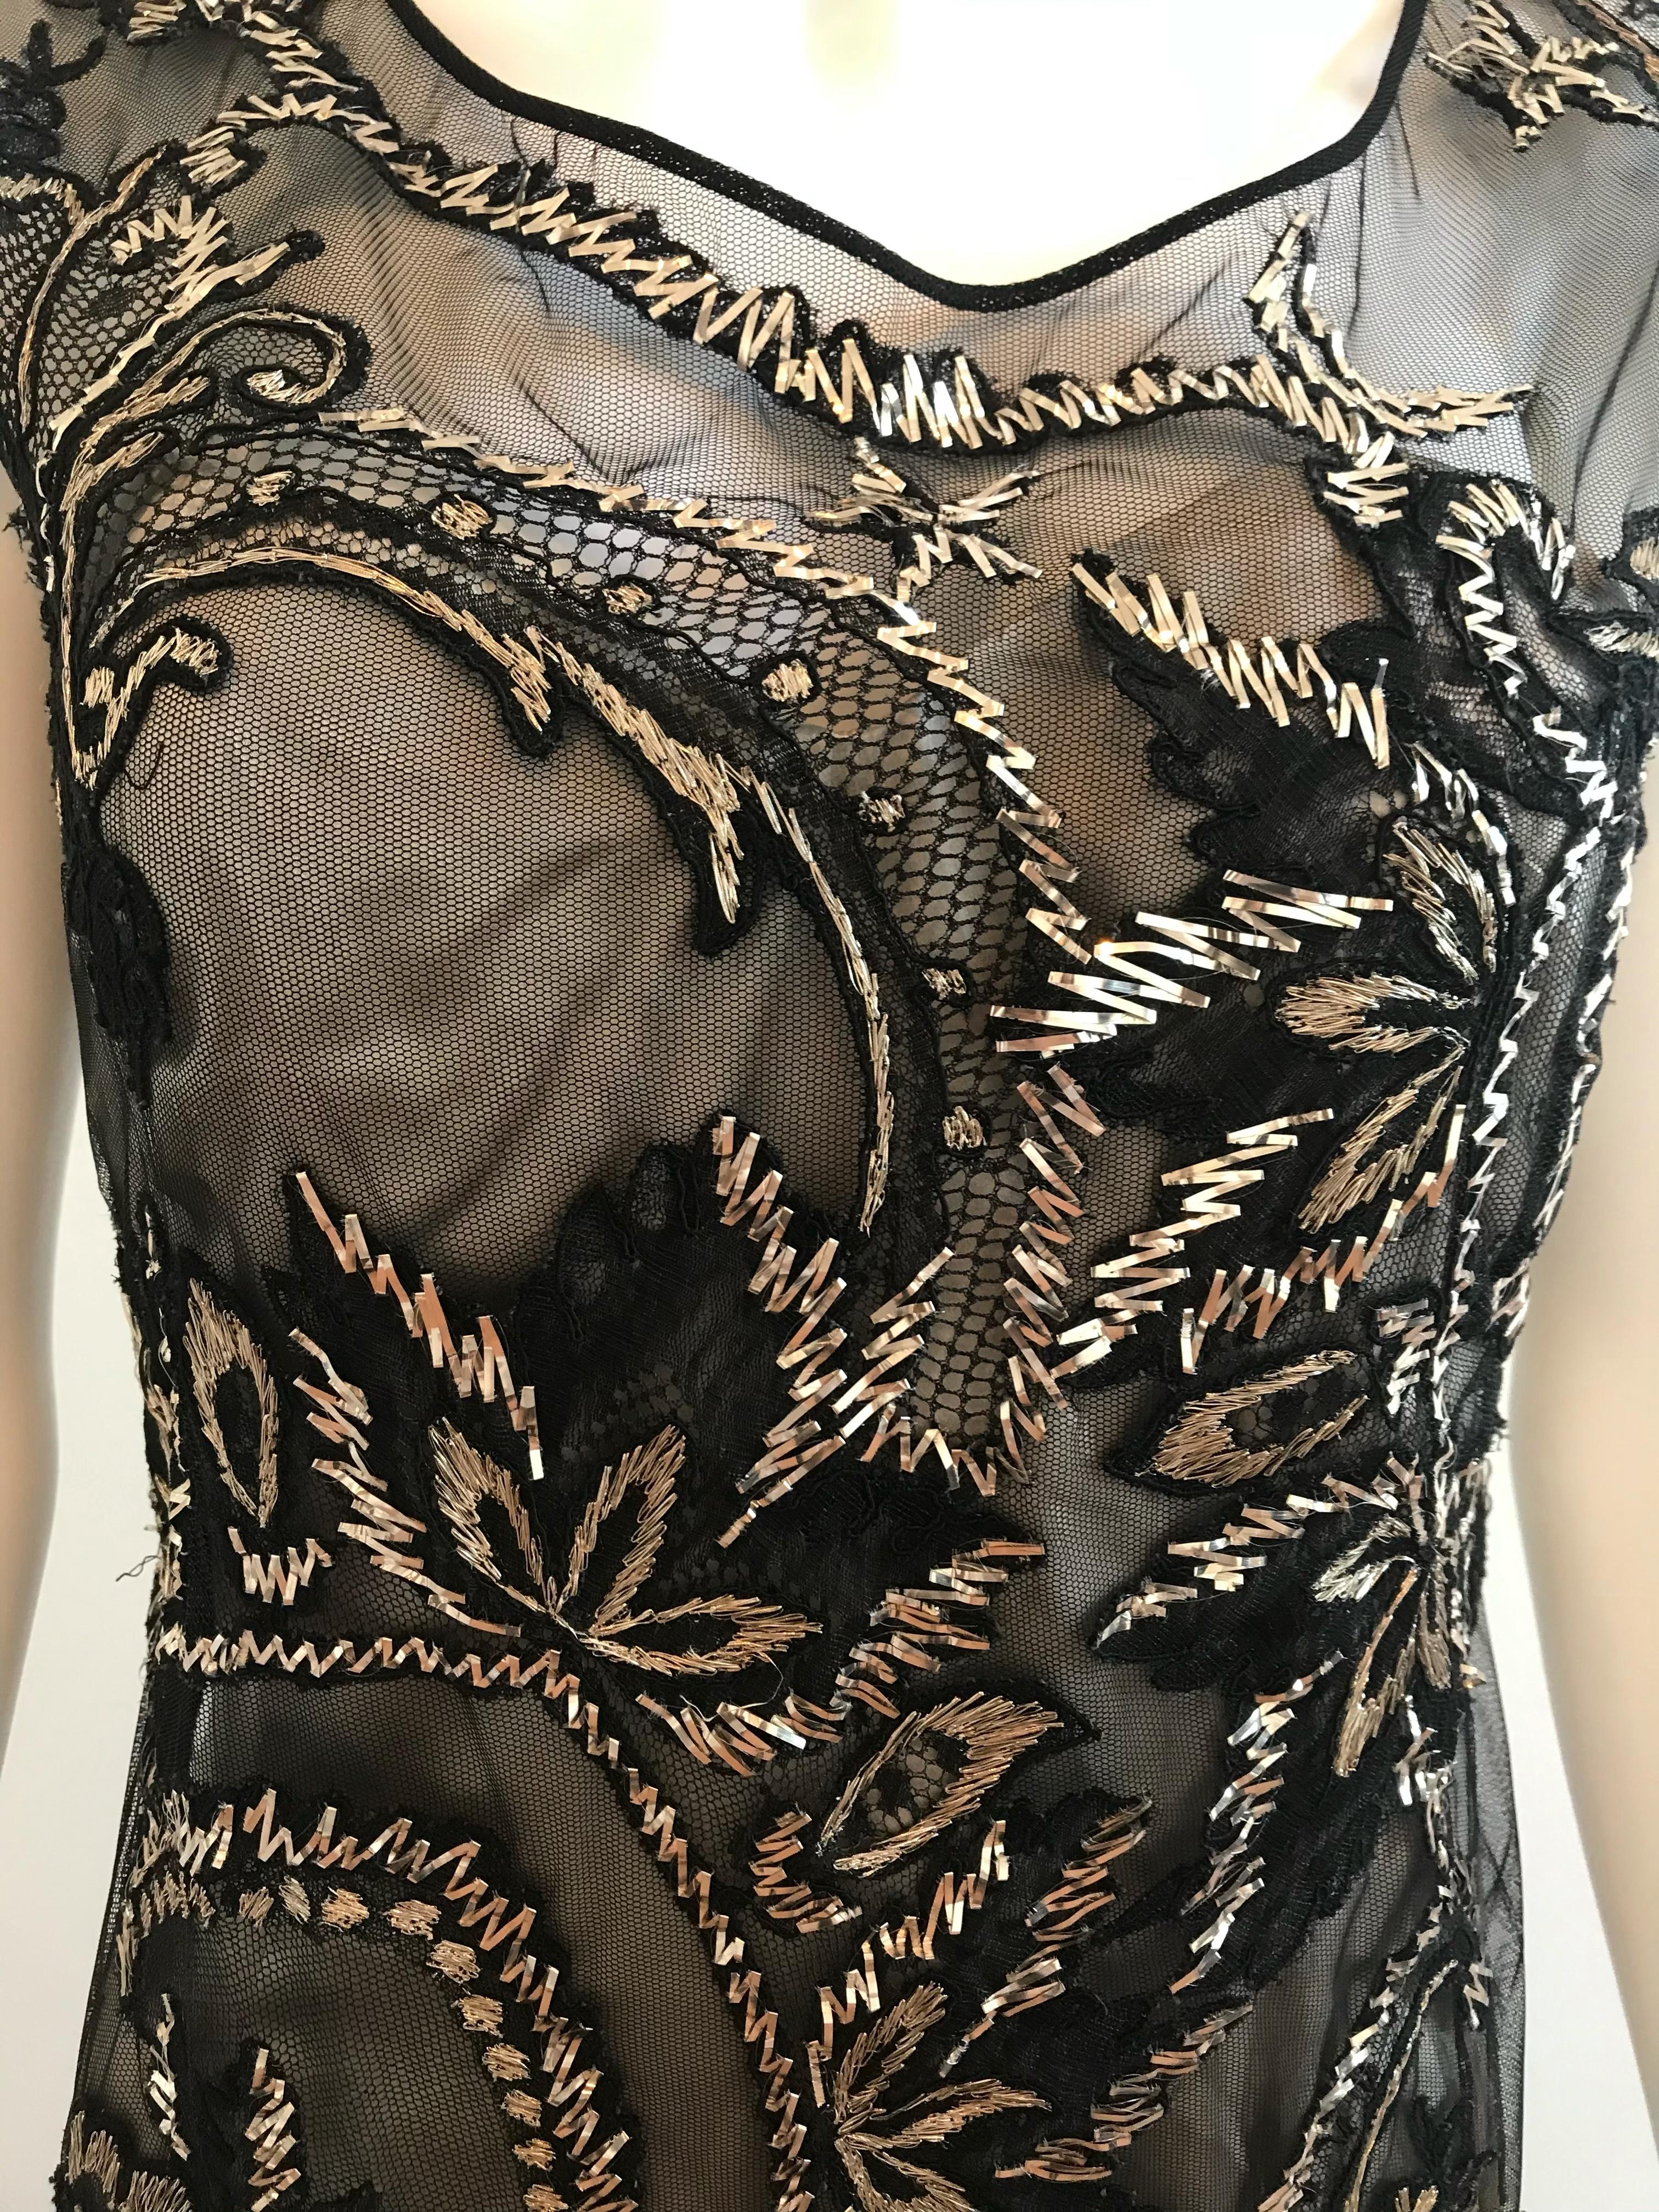 FW 1998 Gianfranco Ferre Metallic Embroidered Tulle Evening Gown For Sale 13